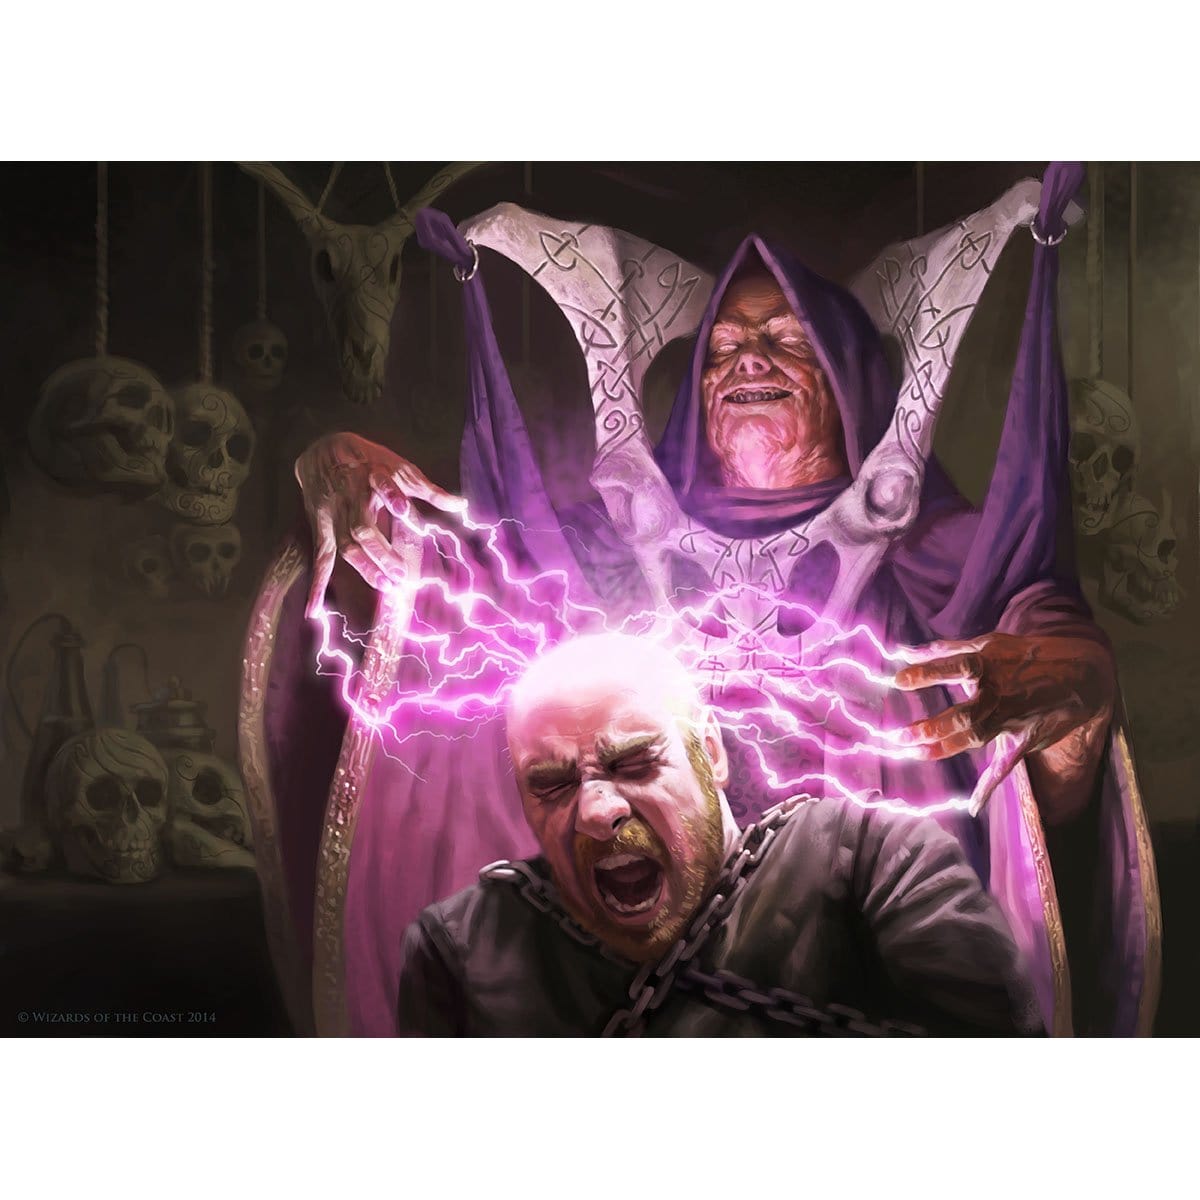 Stain the Mind Print - Print - Original Magic Art - Accessories for Magic the Gathering and other card games